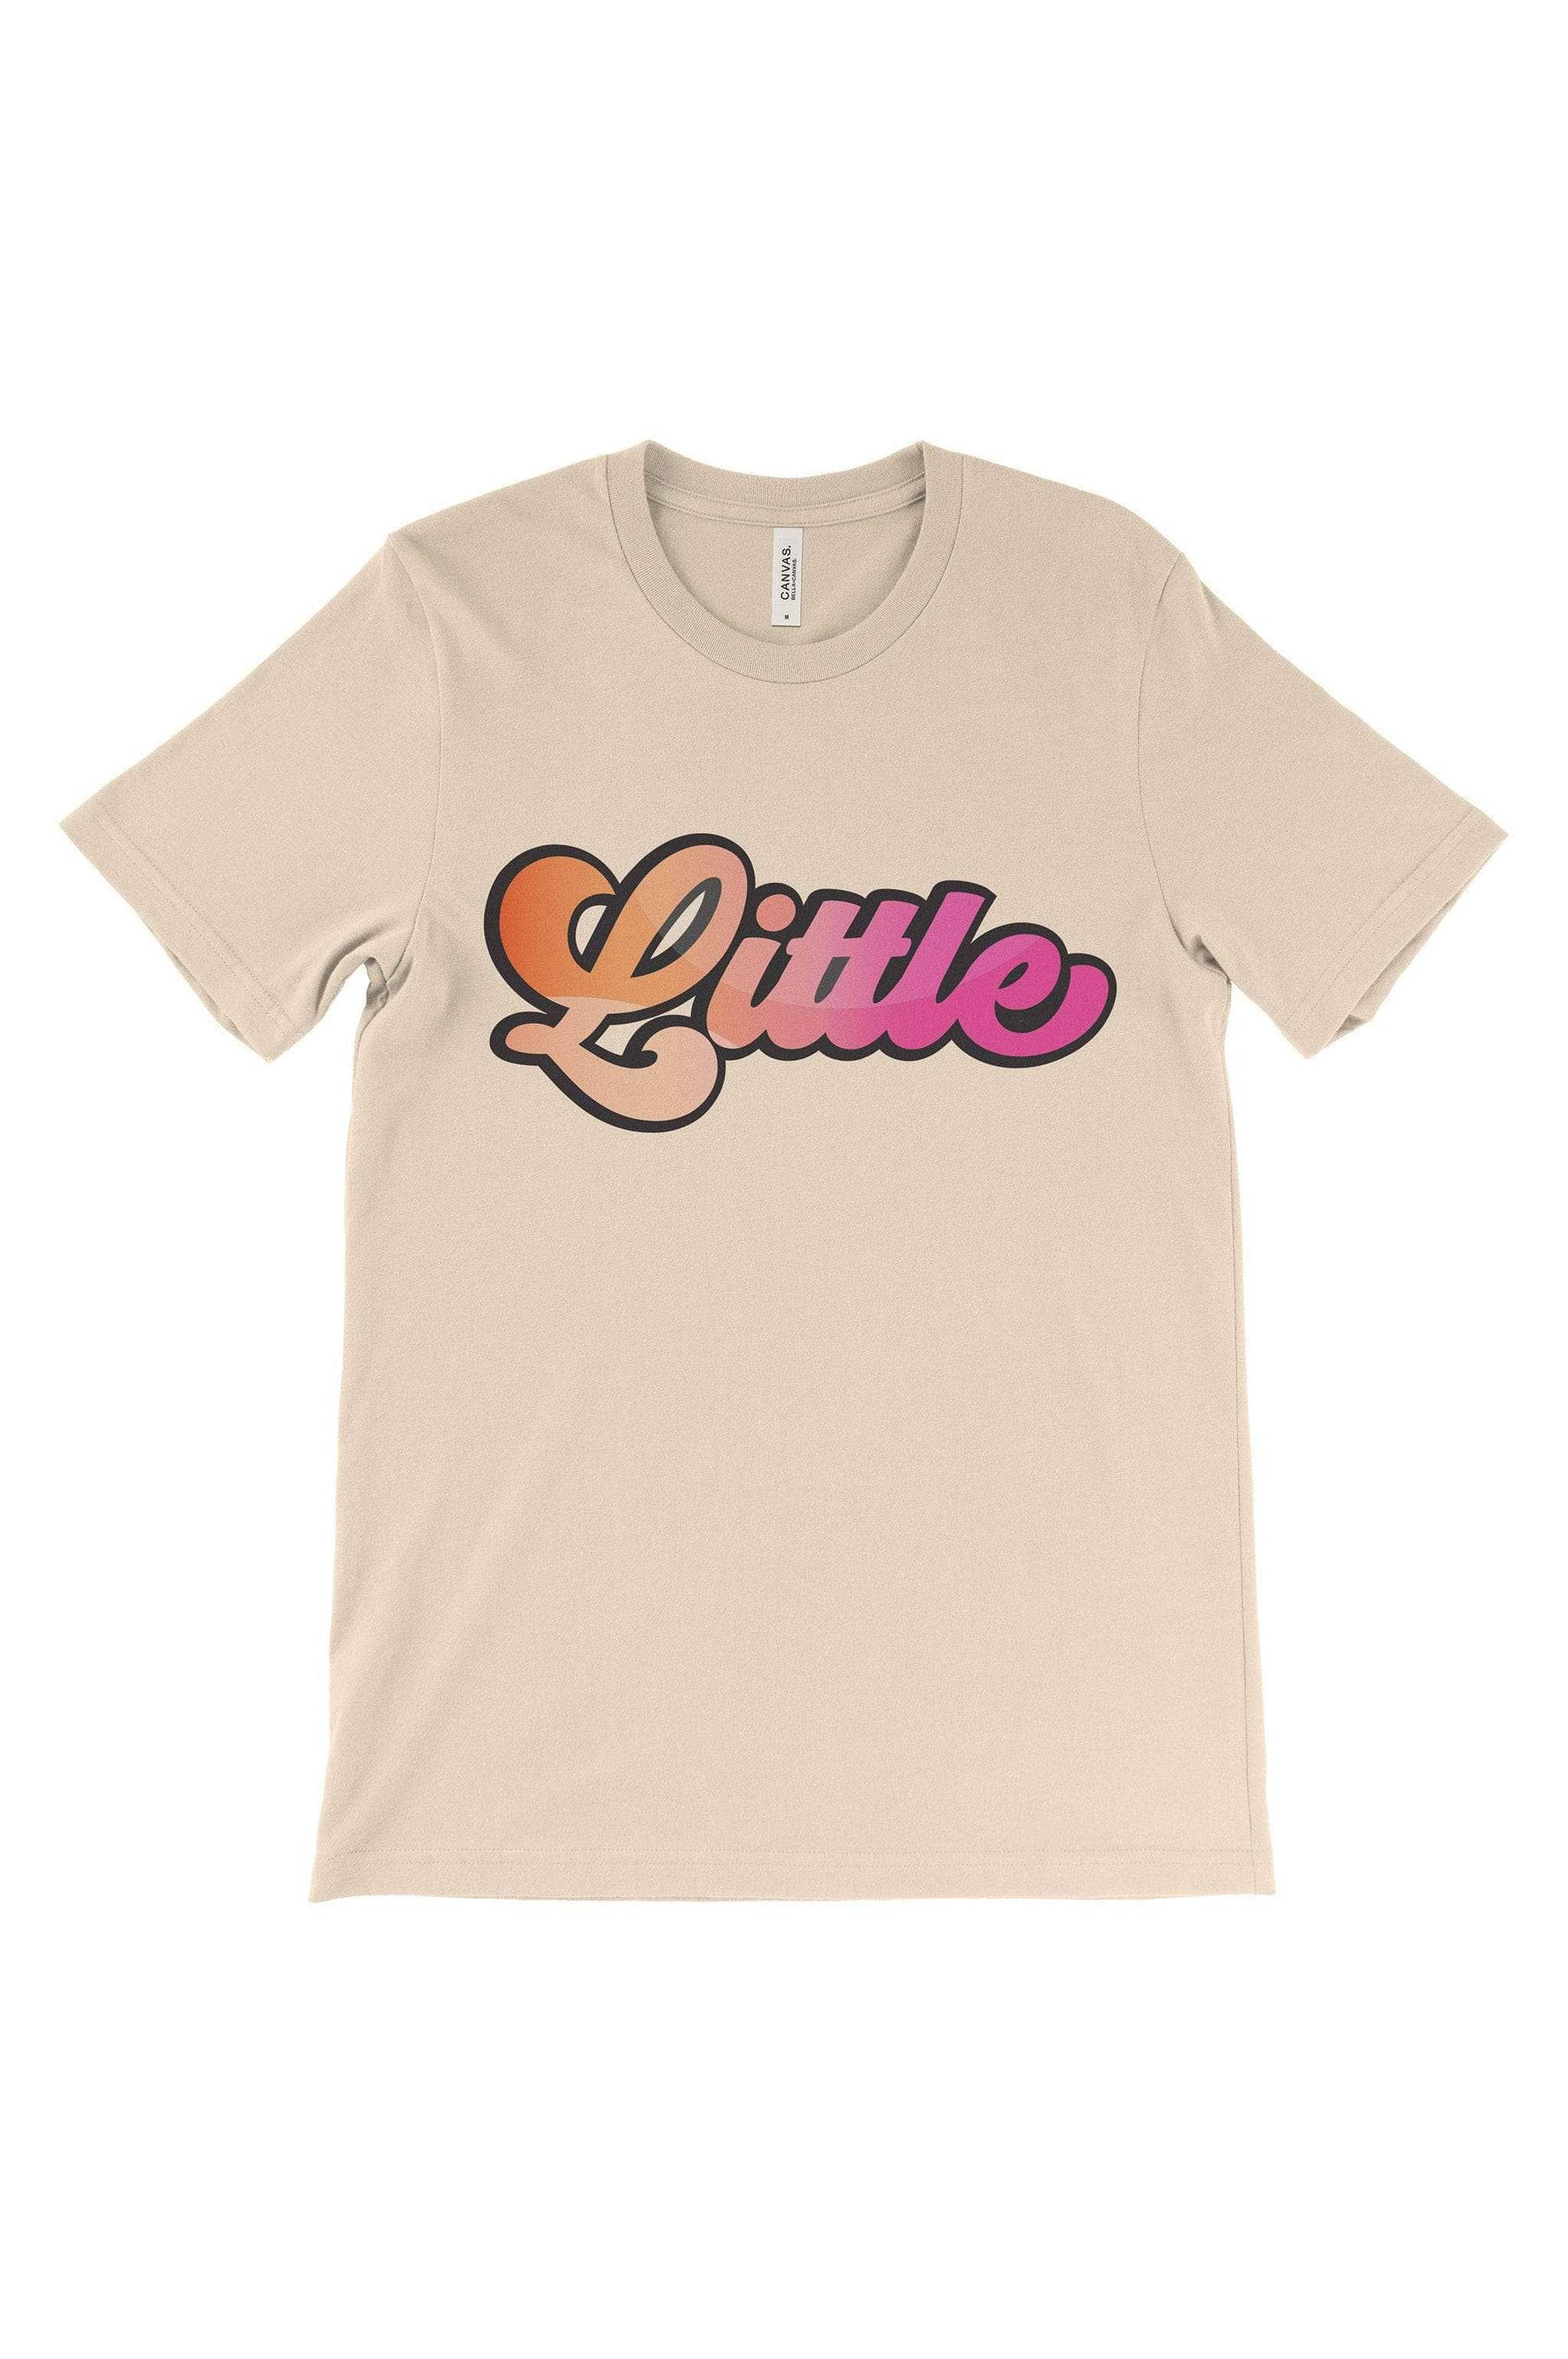 Flower Power Hippie Big Little Bella Canvas Short Sleeve Unisex Tee, Ladies, Sunny and Southern, - Sunny and Southern,